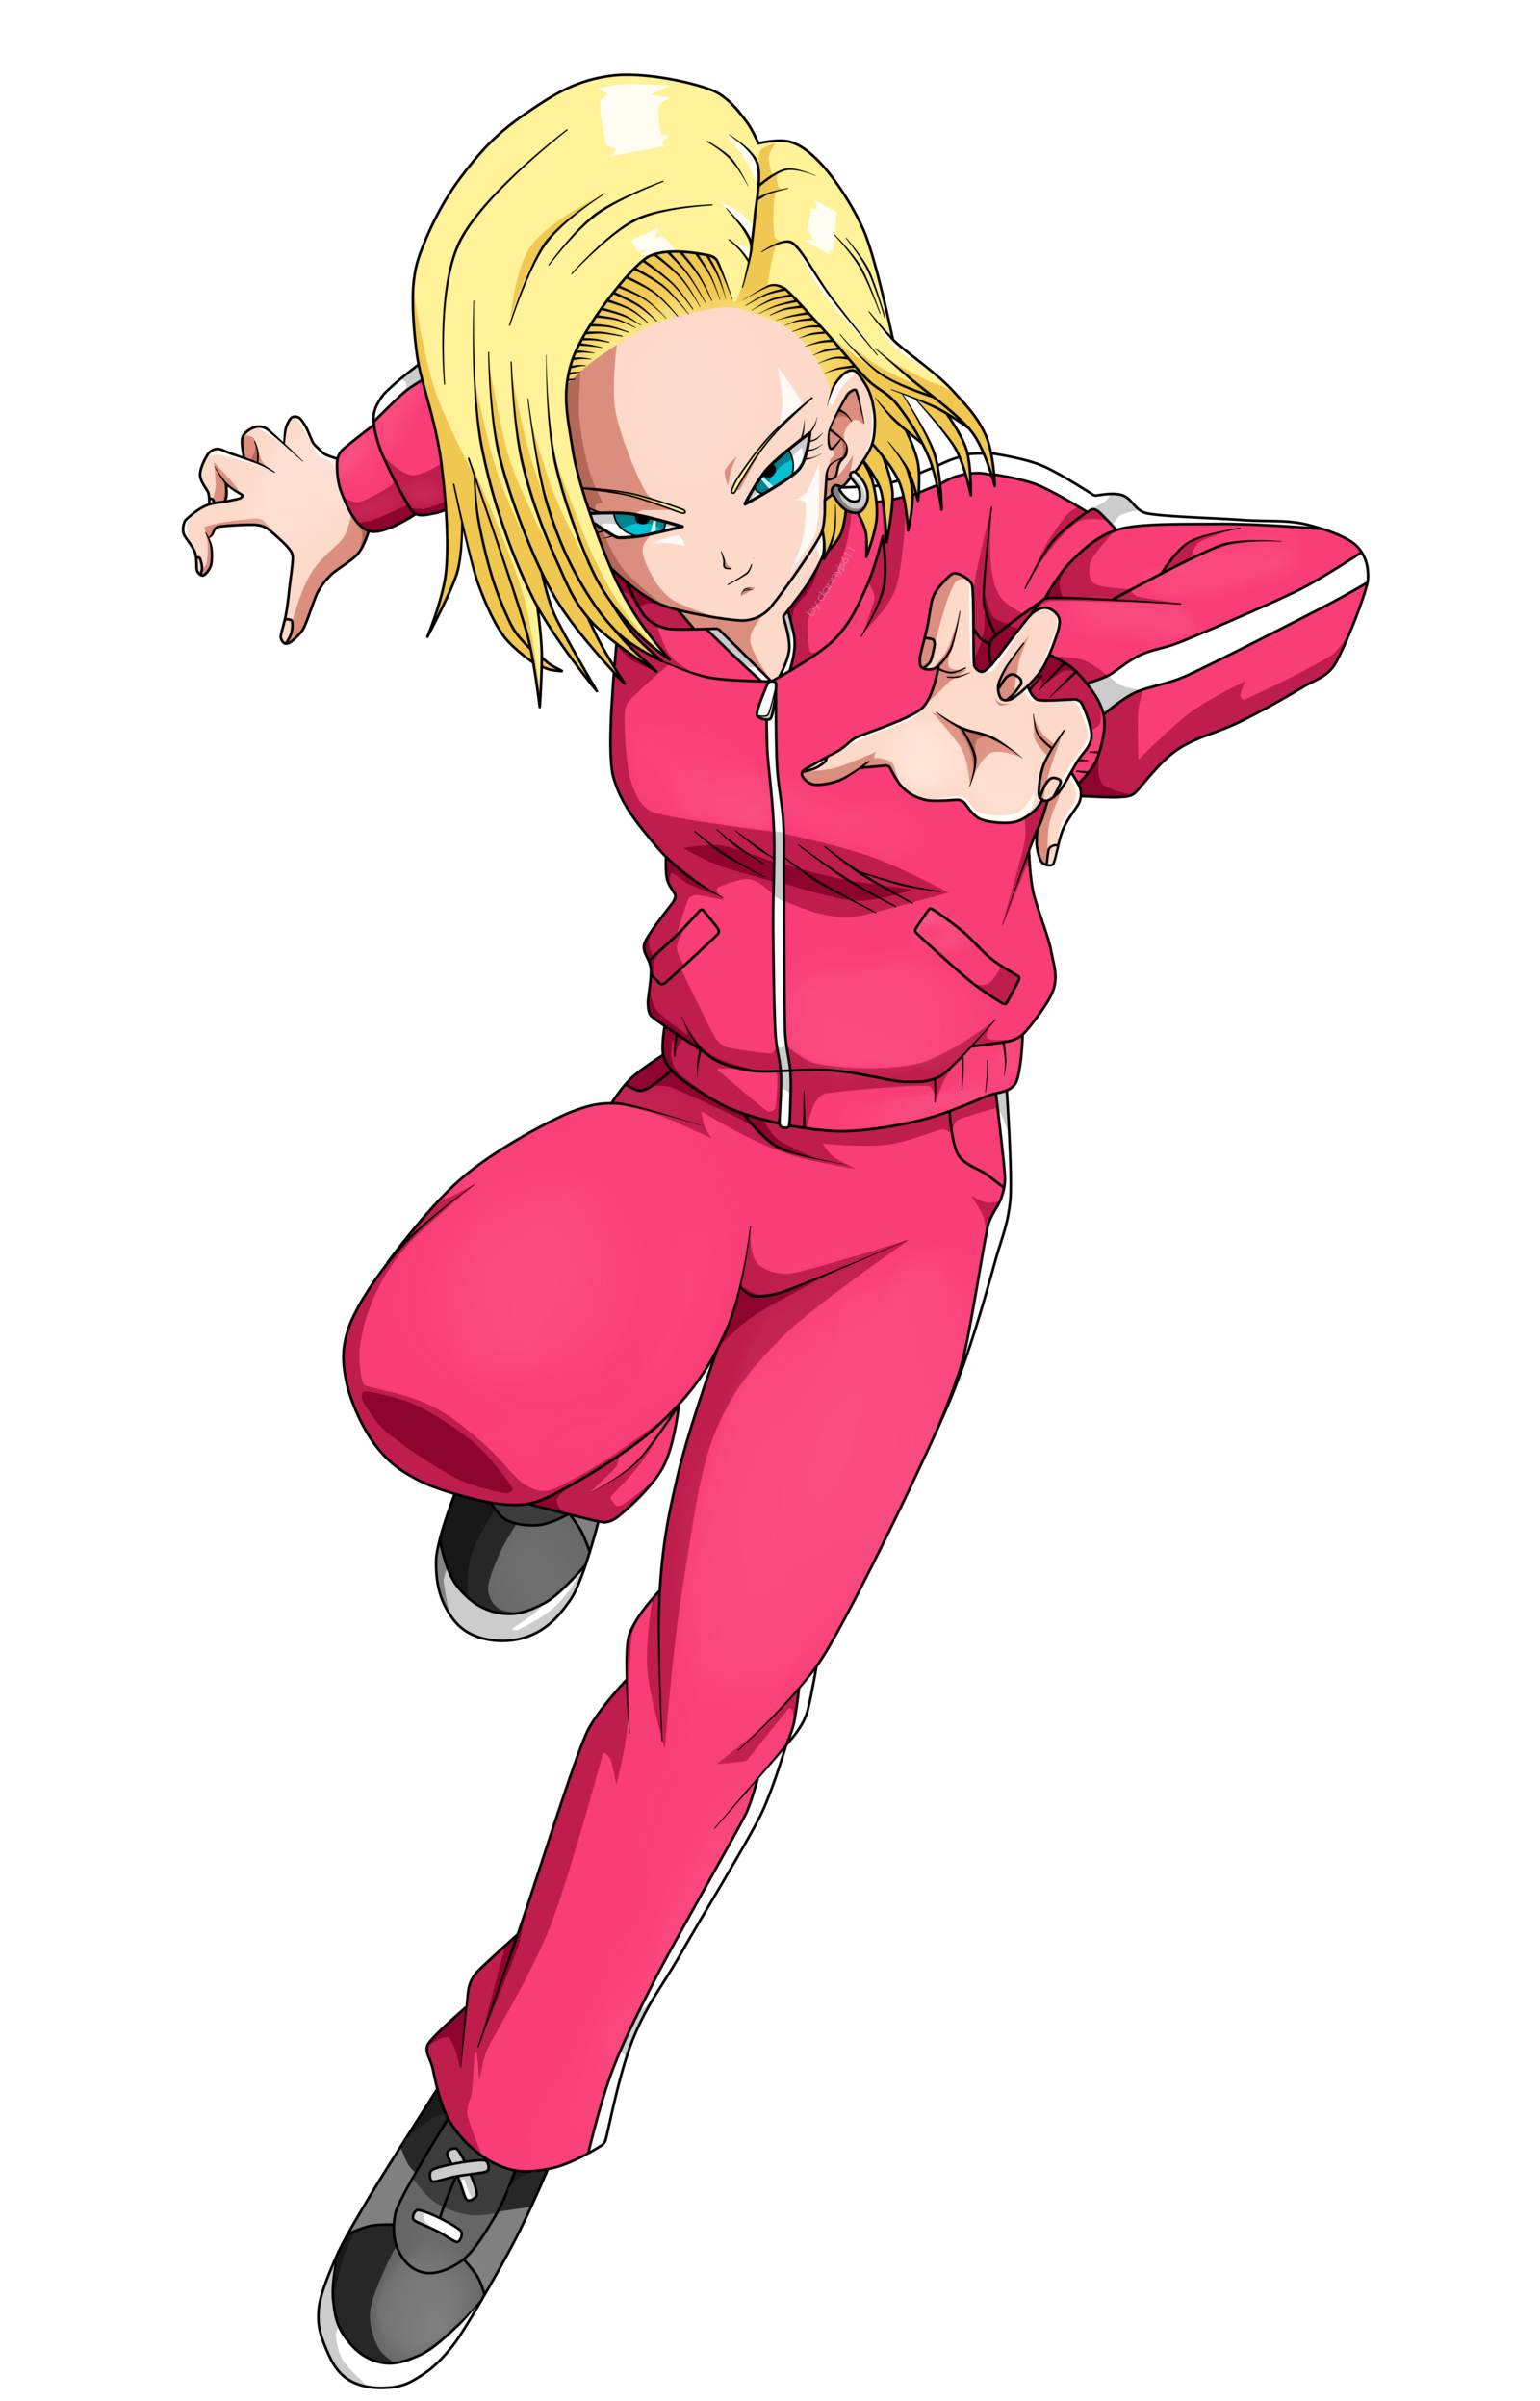 Android 18 is the twin sister of Android 17 and Dr. Gero's eightee...